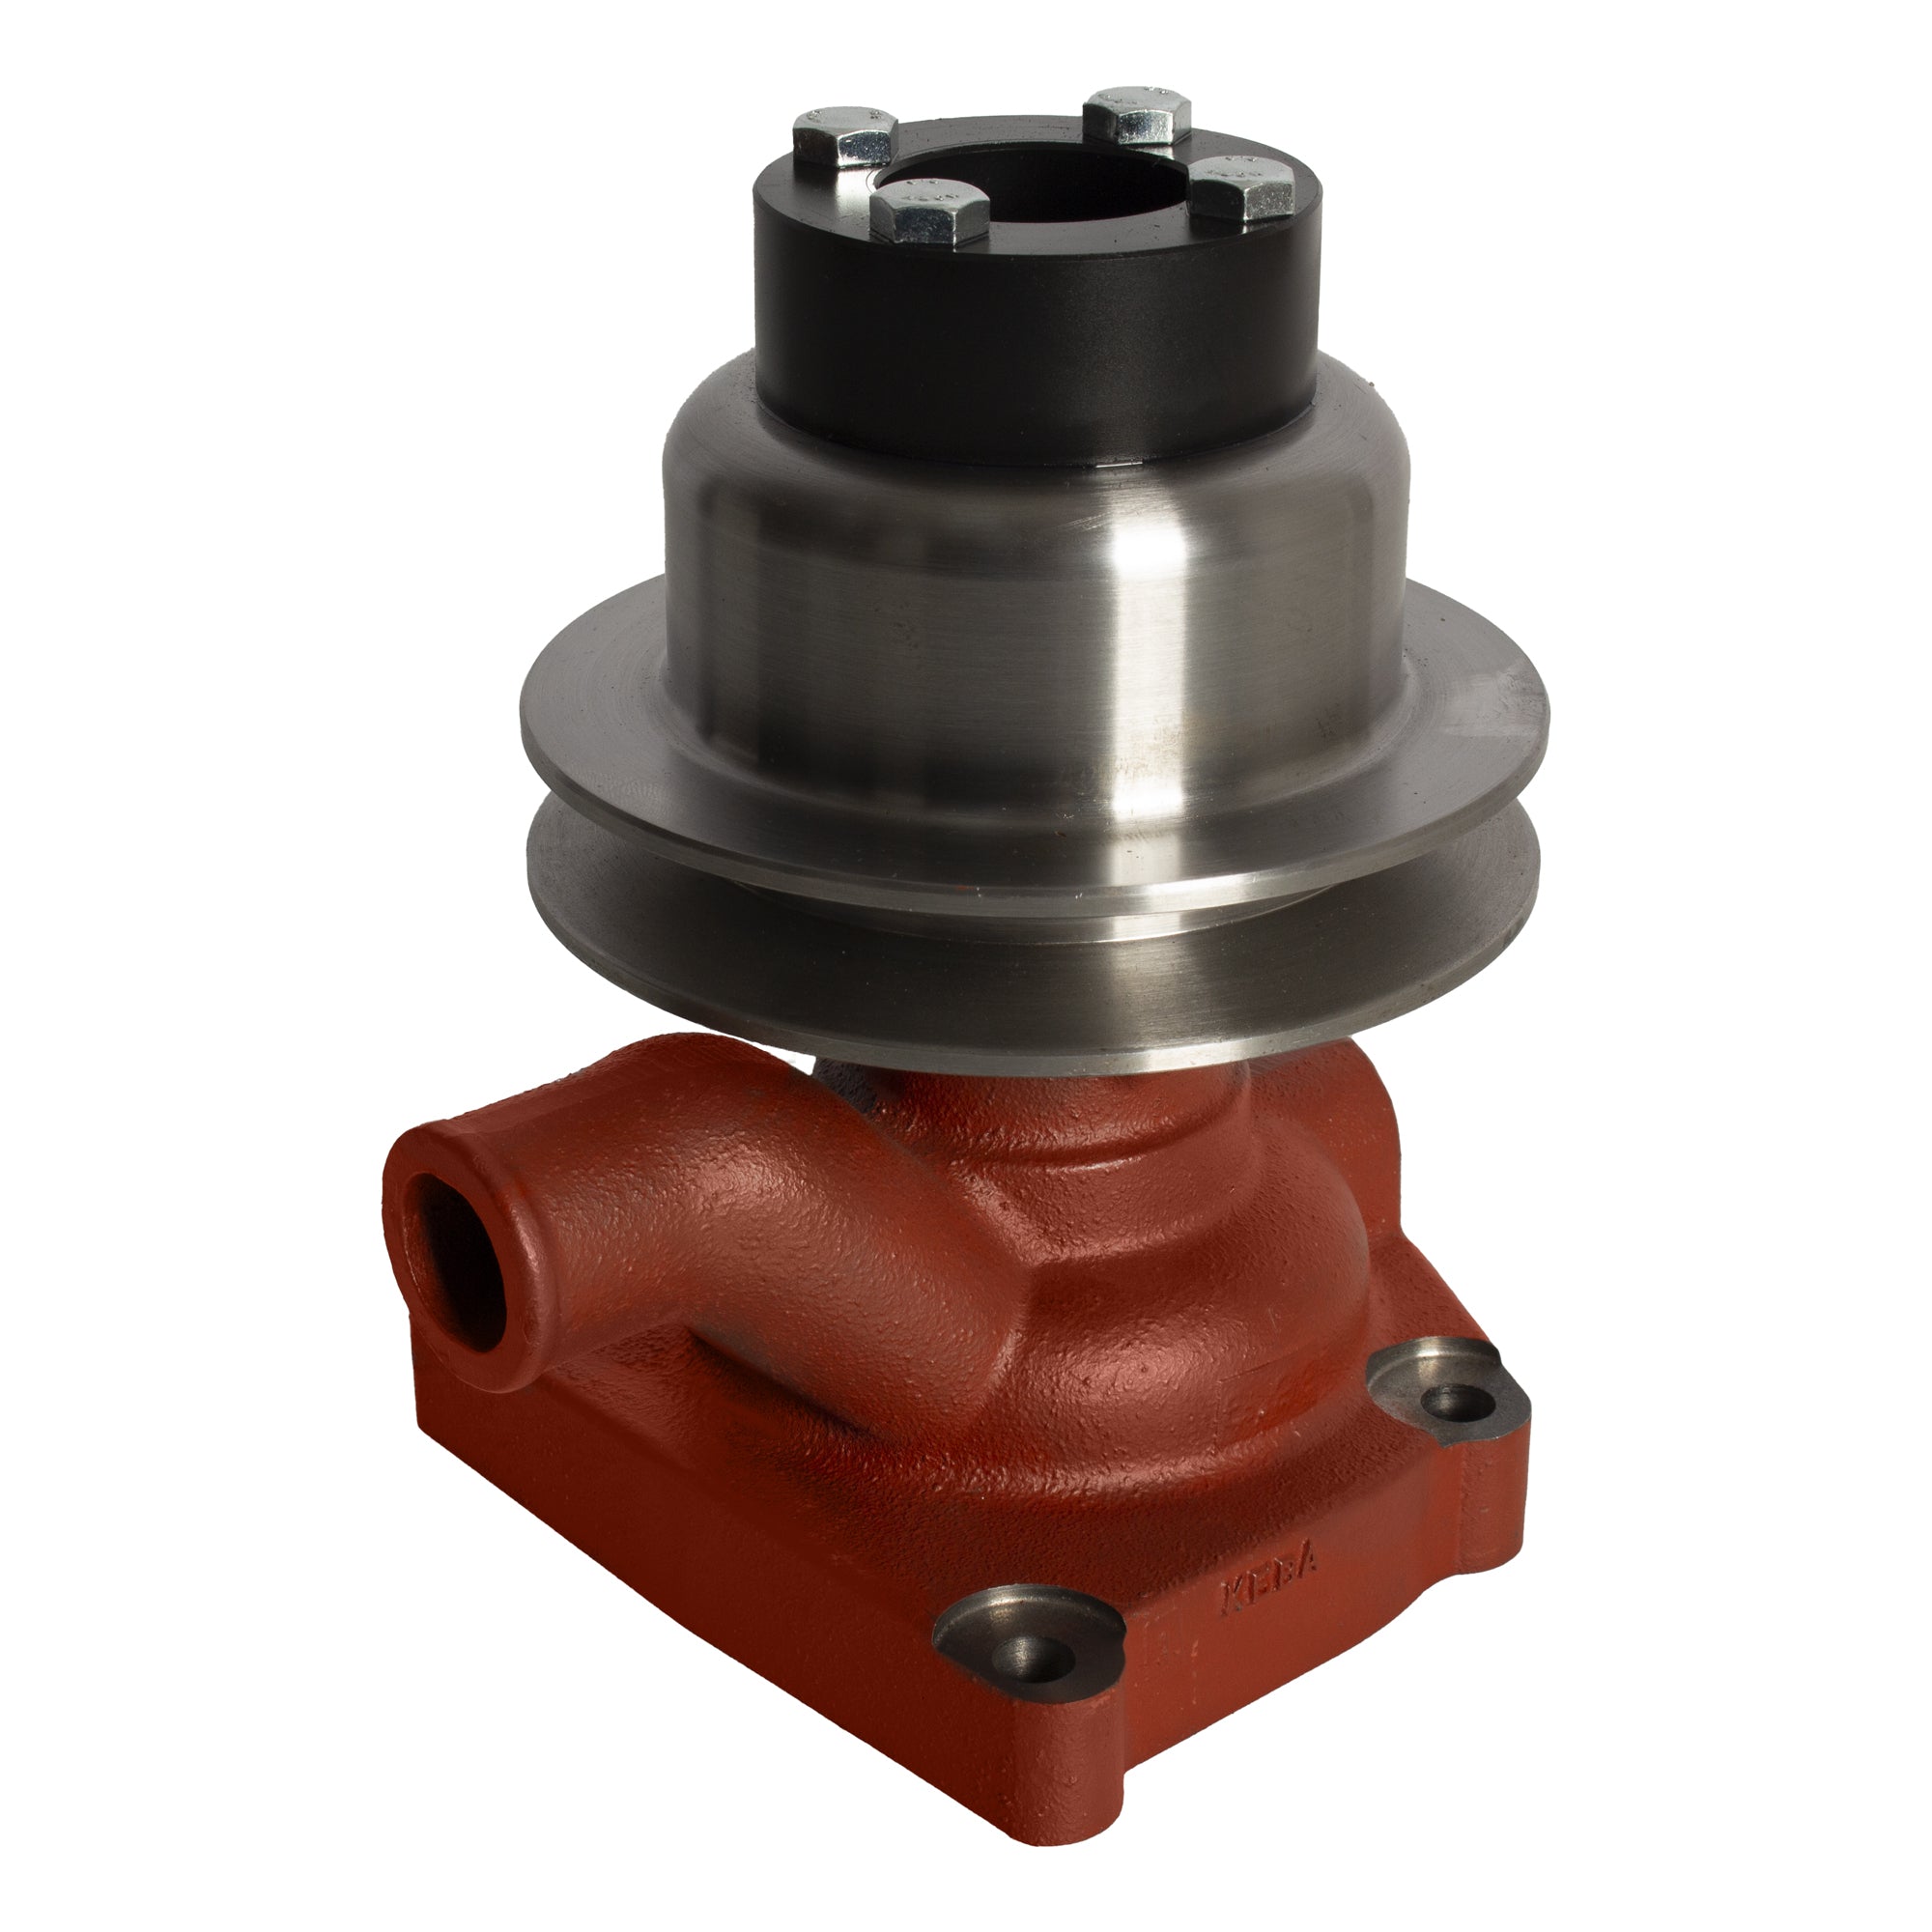 Water Pump Replacement for Zetor; 5511, 5611, 5711, 6711, 5745 30010610/55010600